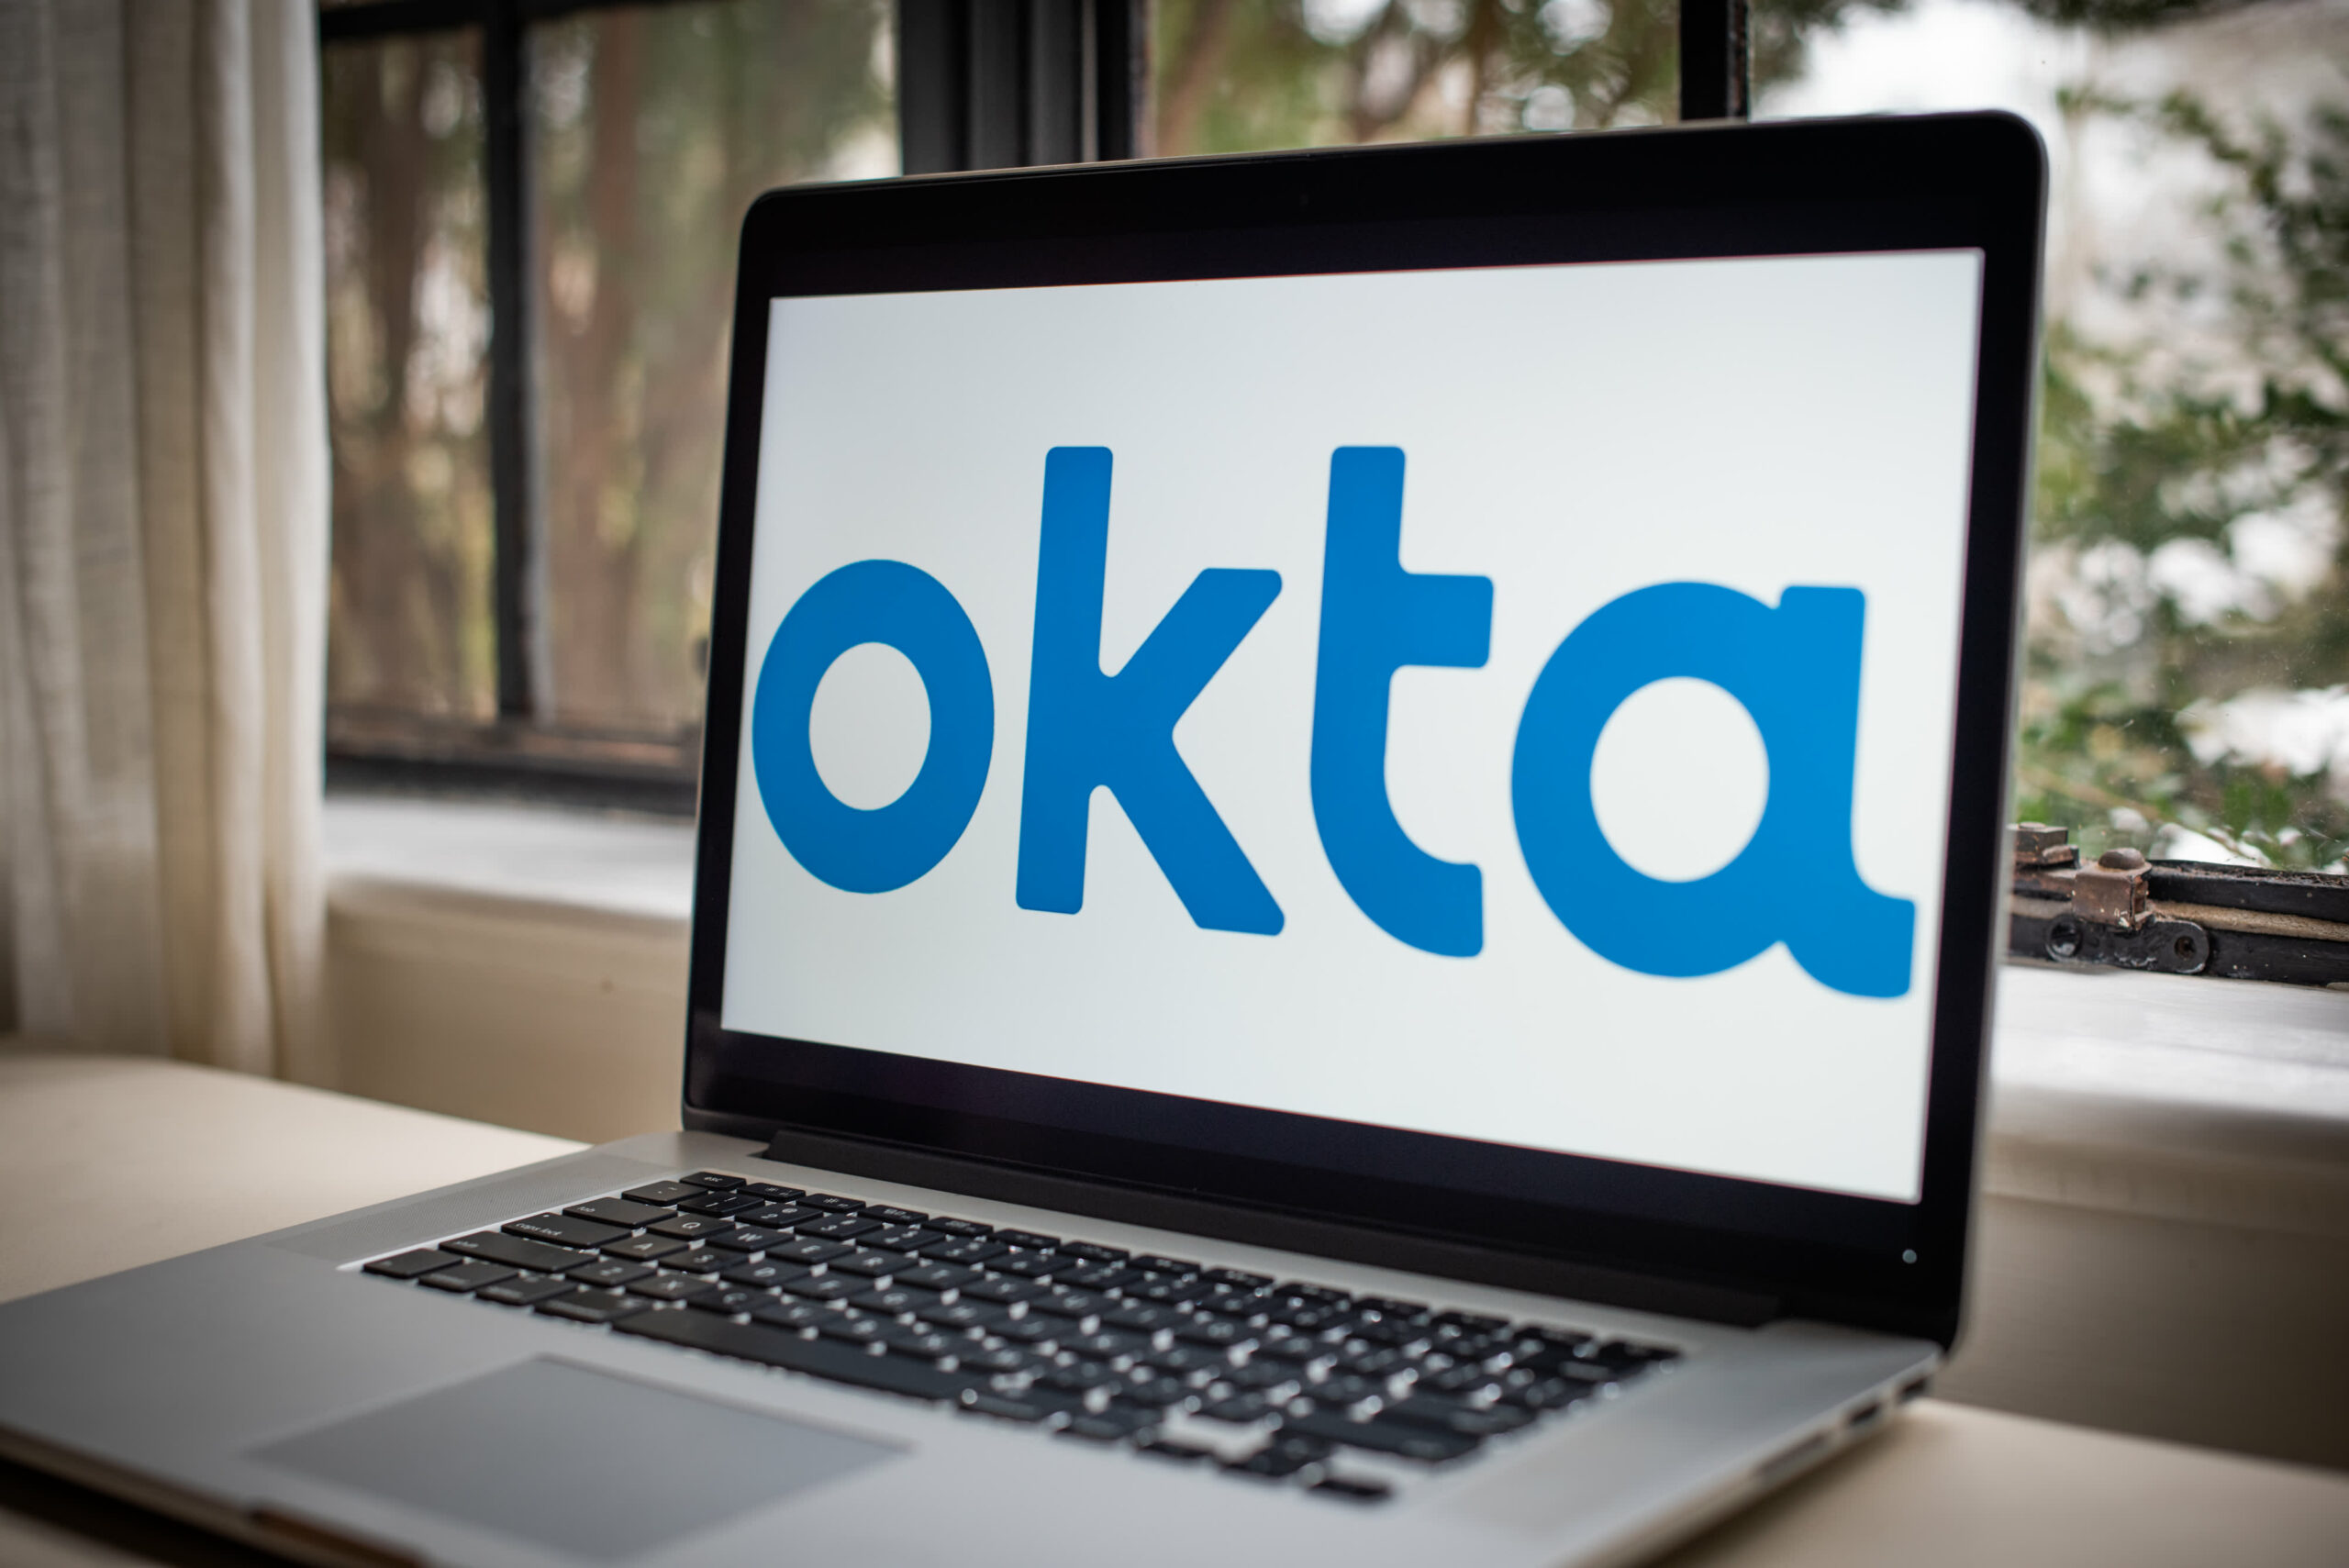 Here’s why identity software firm Okta plans to open a retail location in New York City